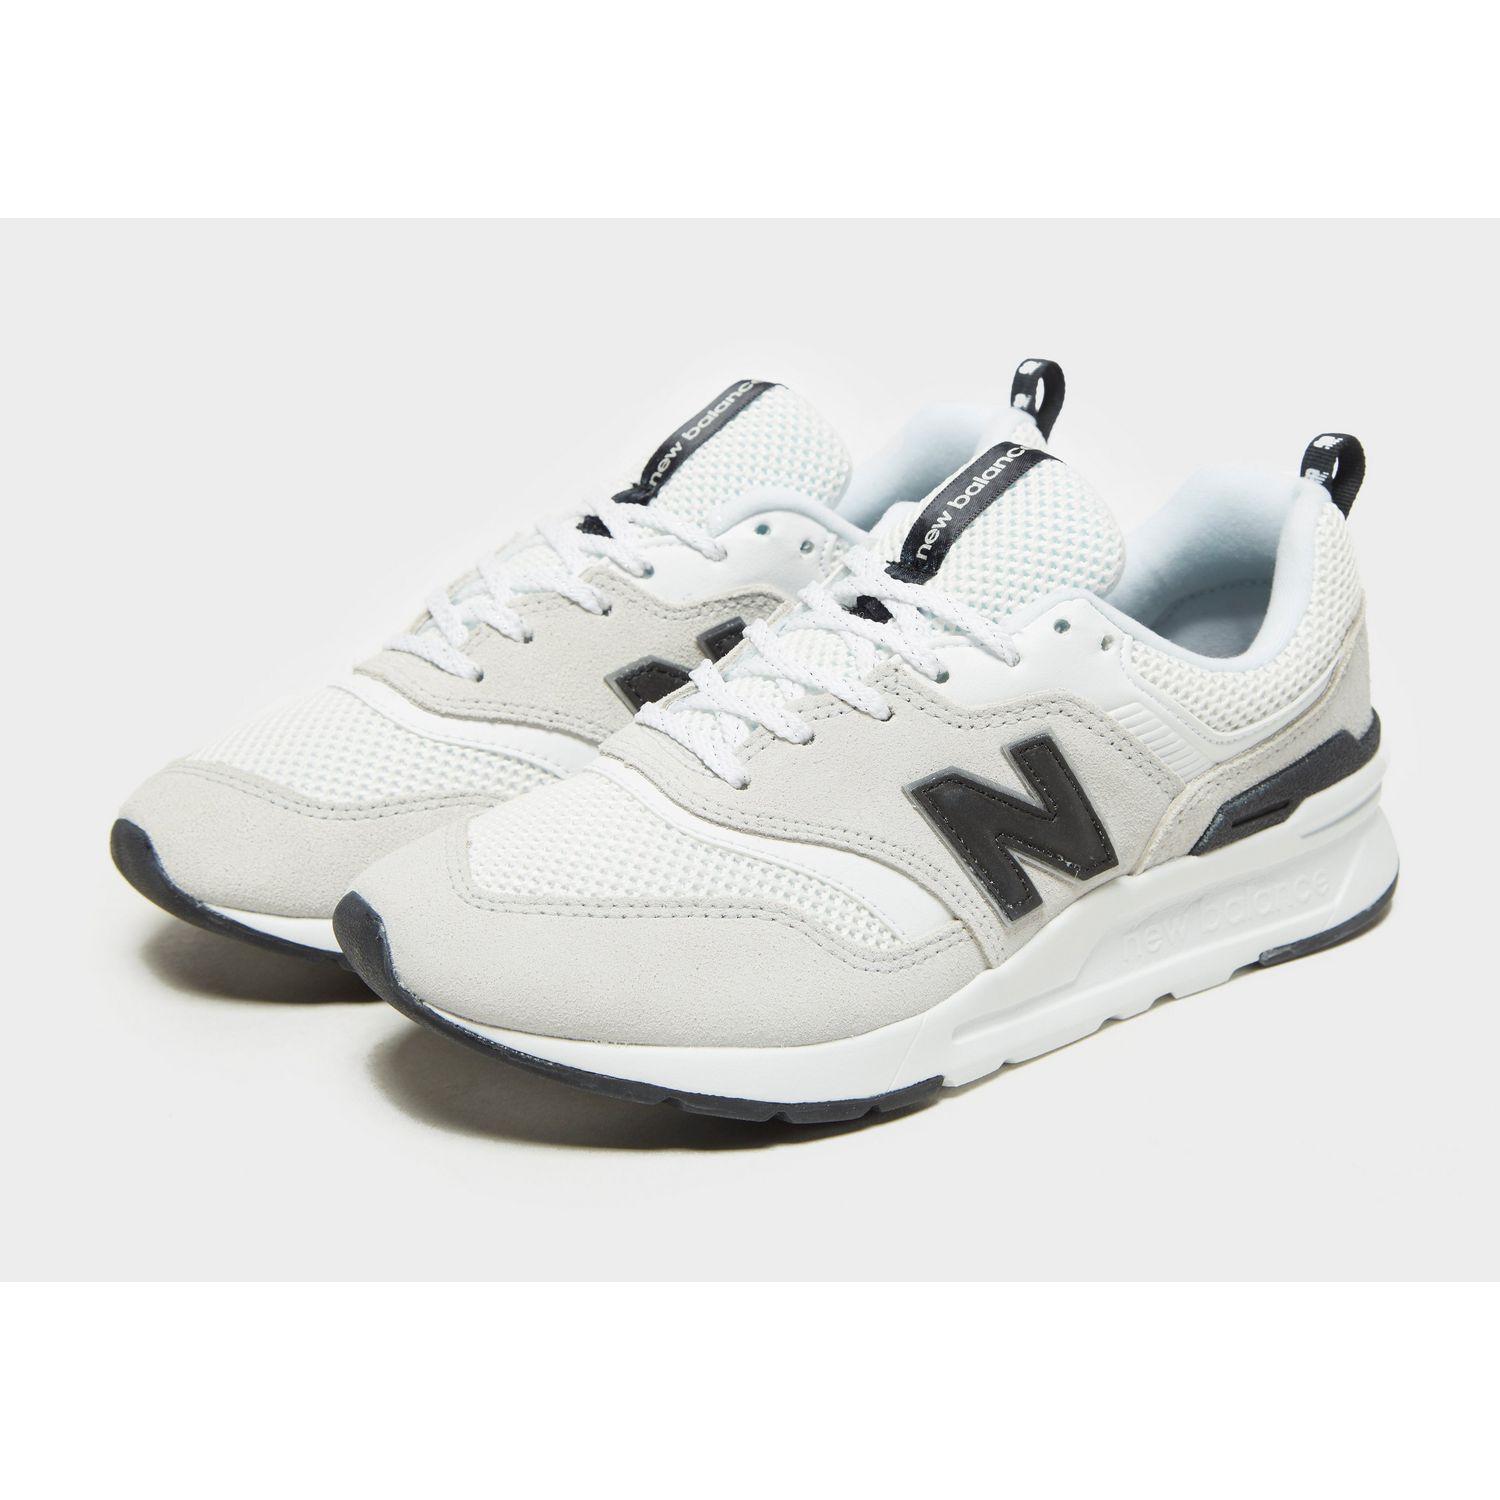 New Balance Suede 997h in White/Black (White) - Lyst